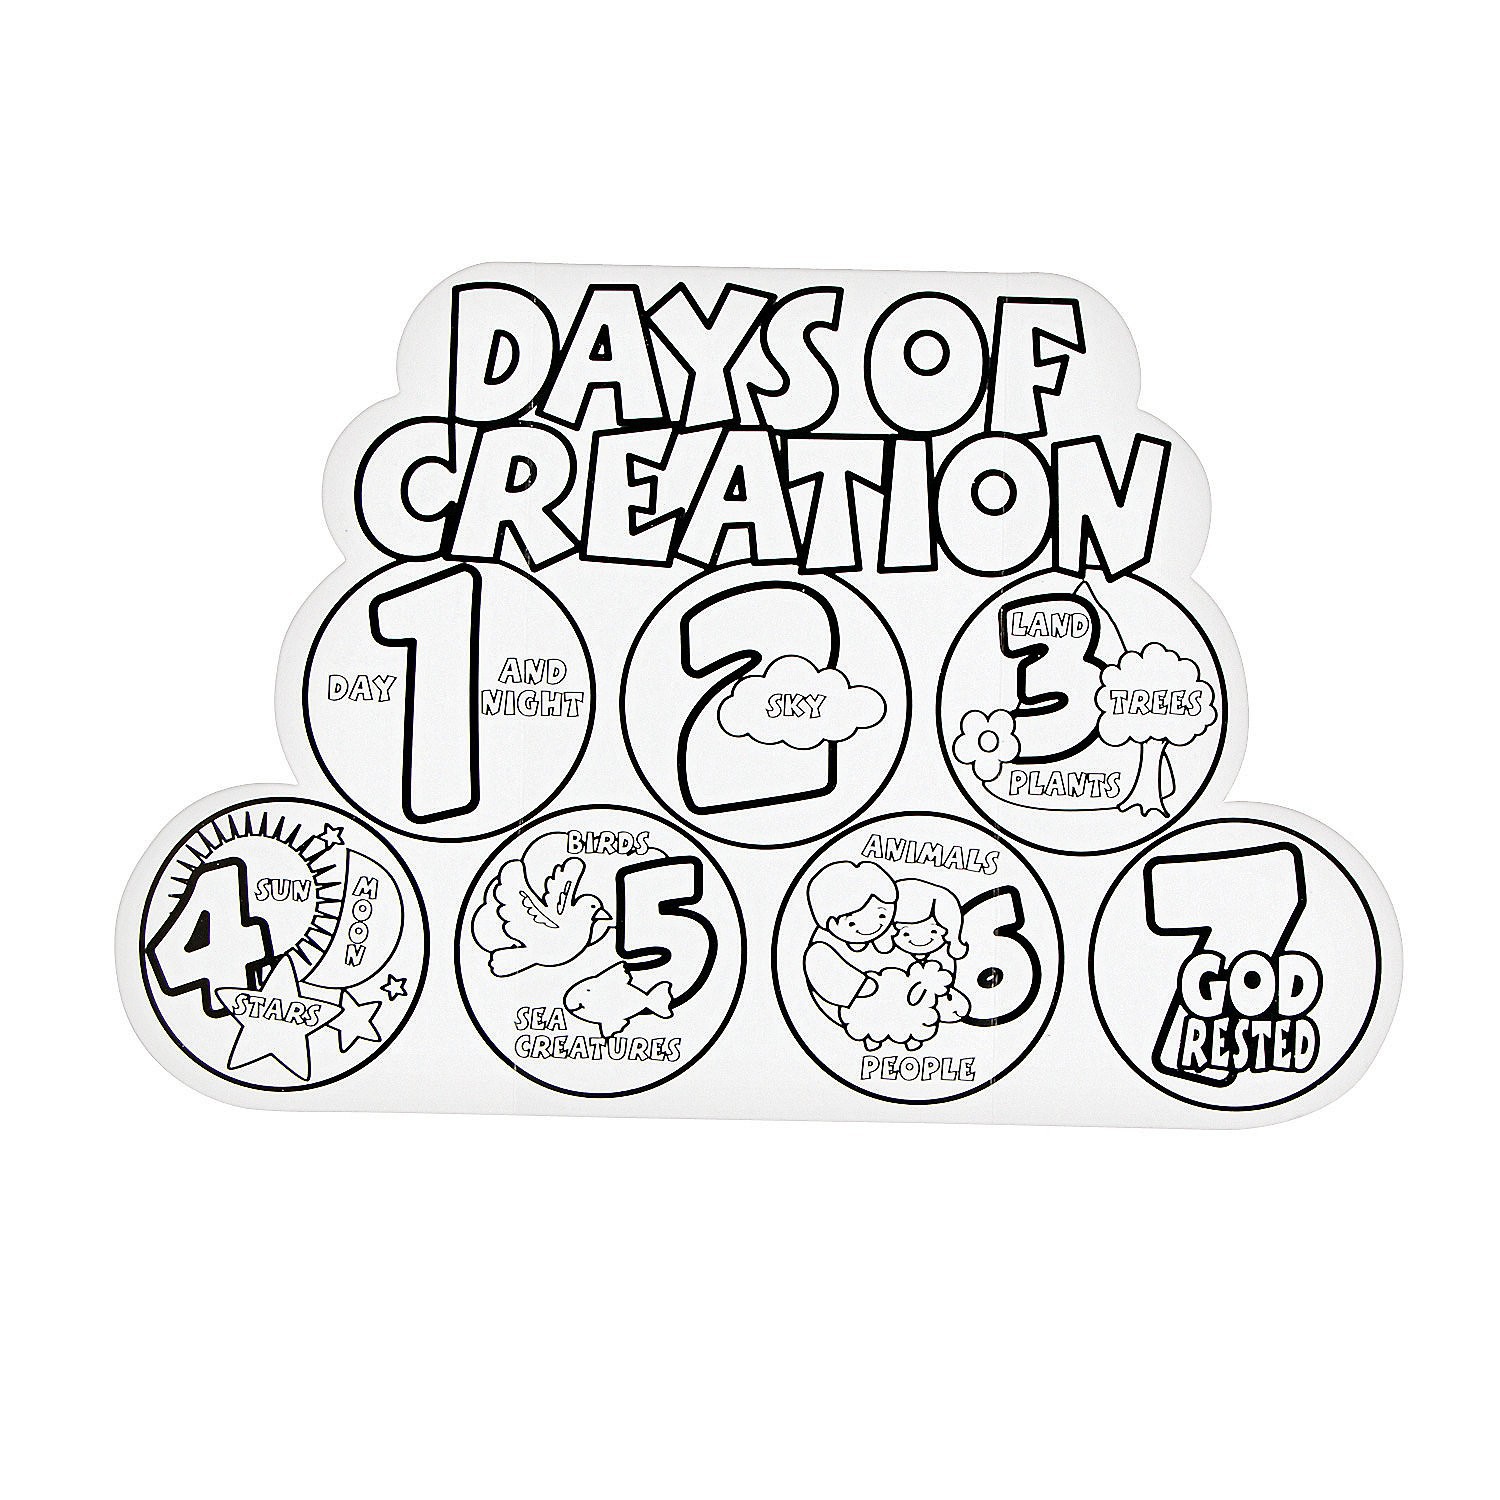 7 Days Of Creation Free Printables